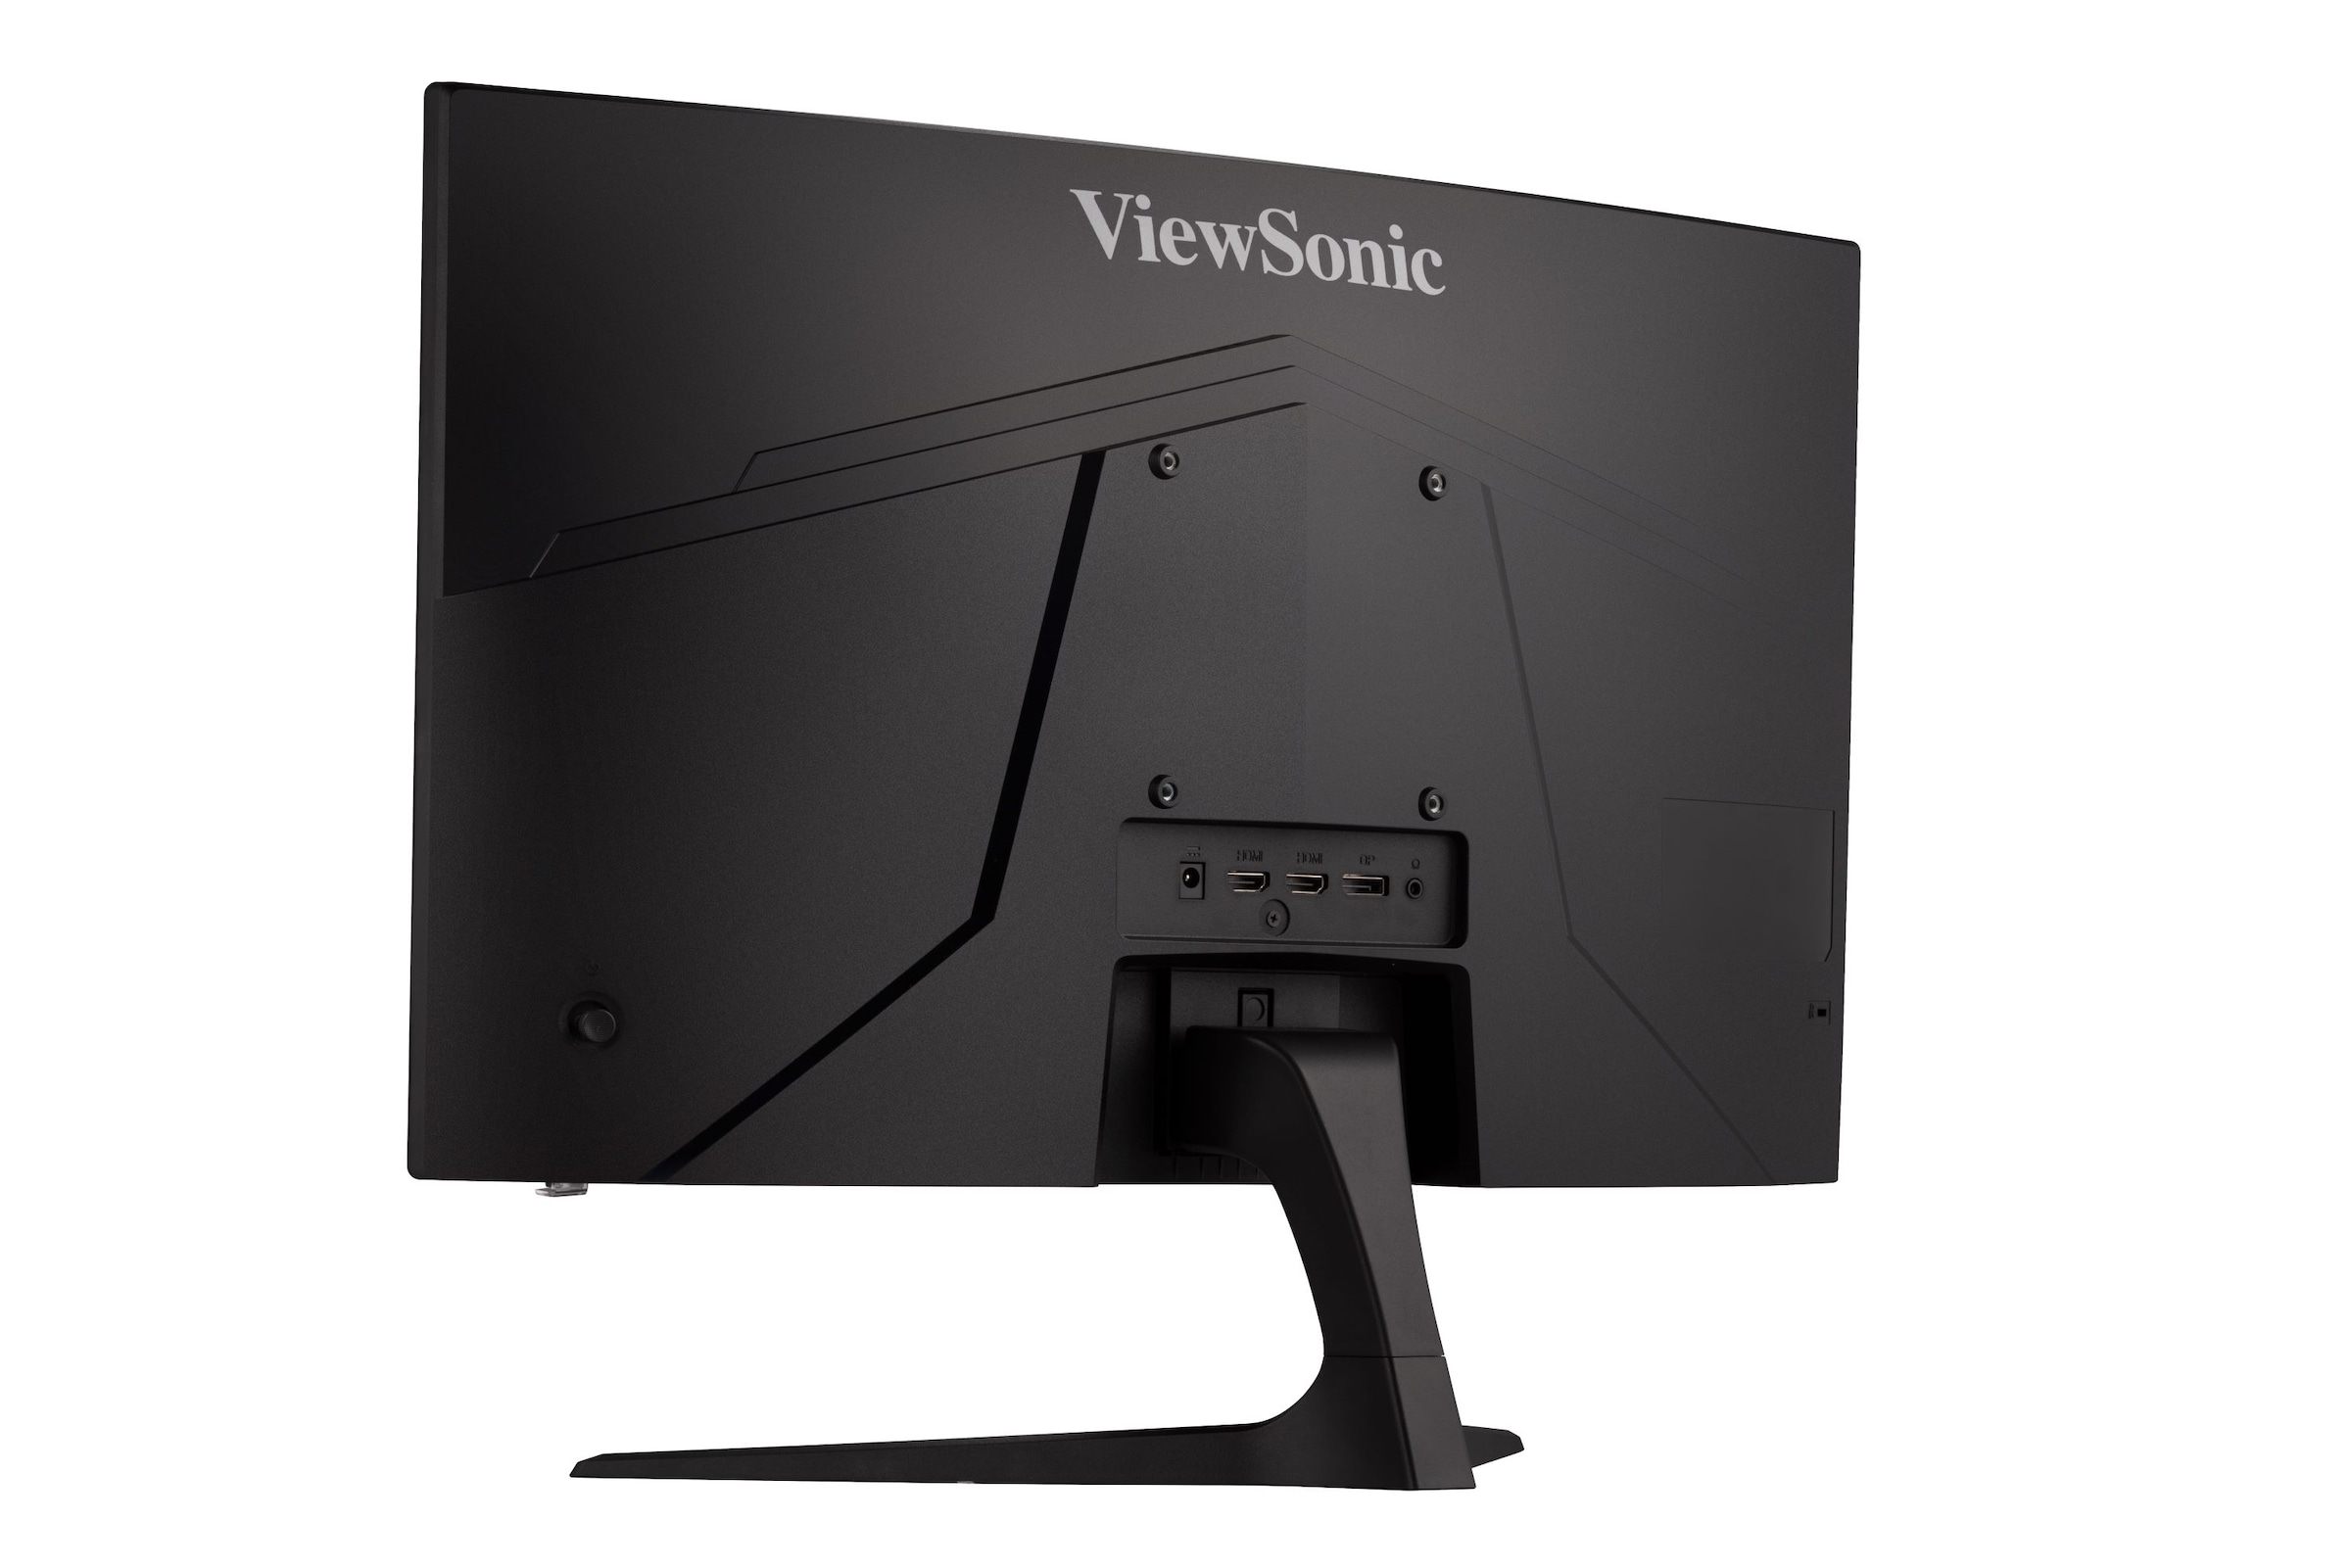 Viewsonic Curved-Gaming-Monitor »VS19012(VX2418C)«, 60 cm/24 Zoll, 1920 x 1080 px, Full HD, 1 ms Reaktionszeit, 165 Hz, 1500R Curved